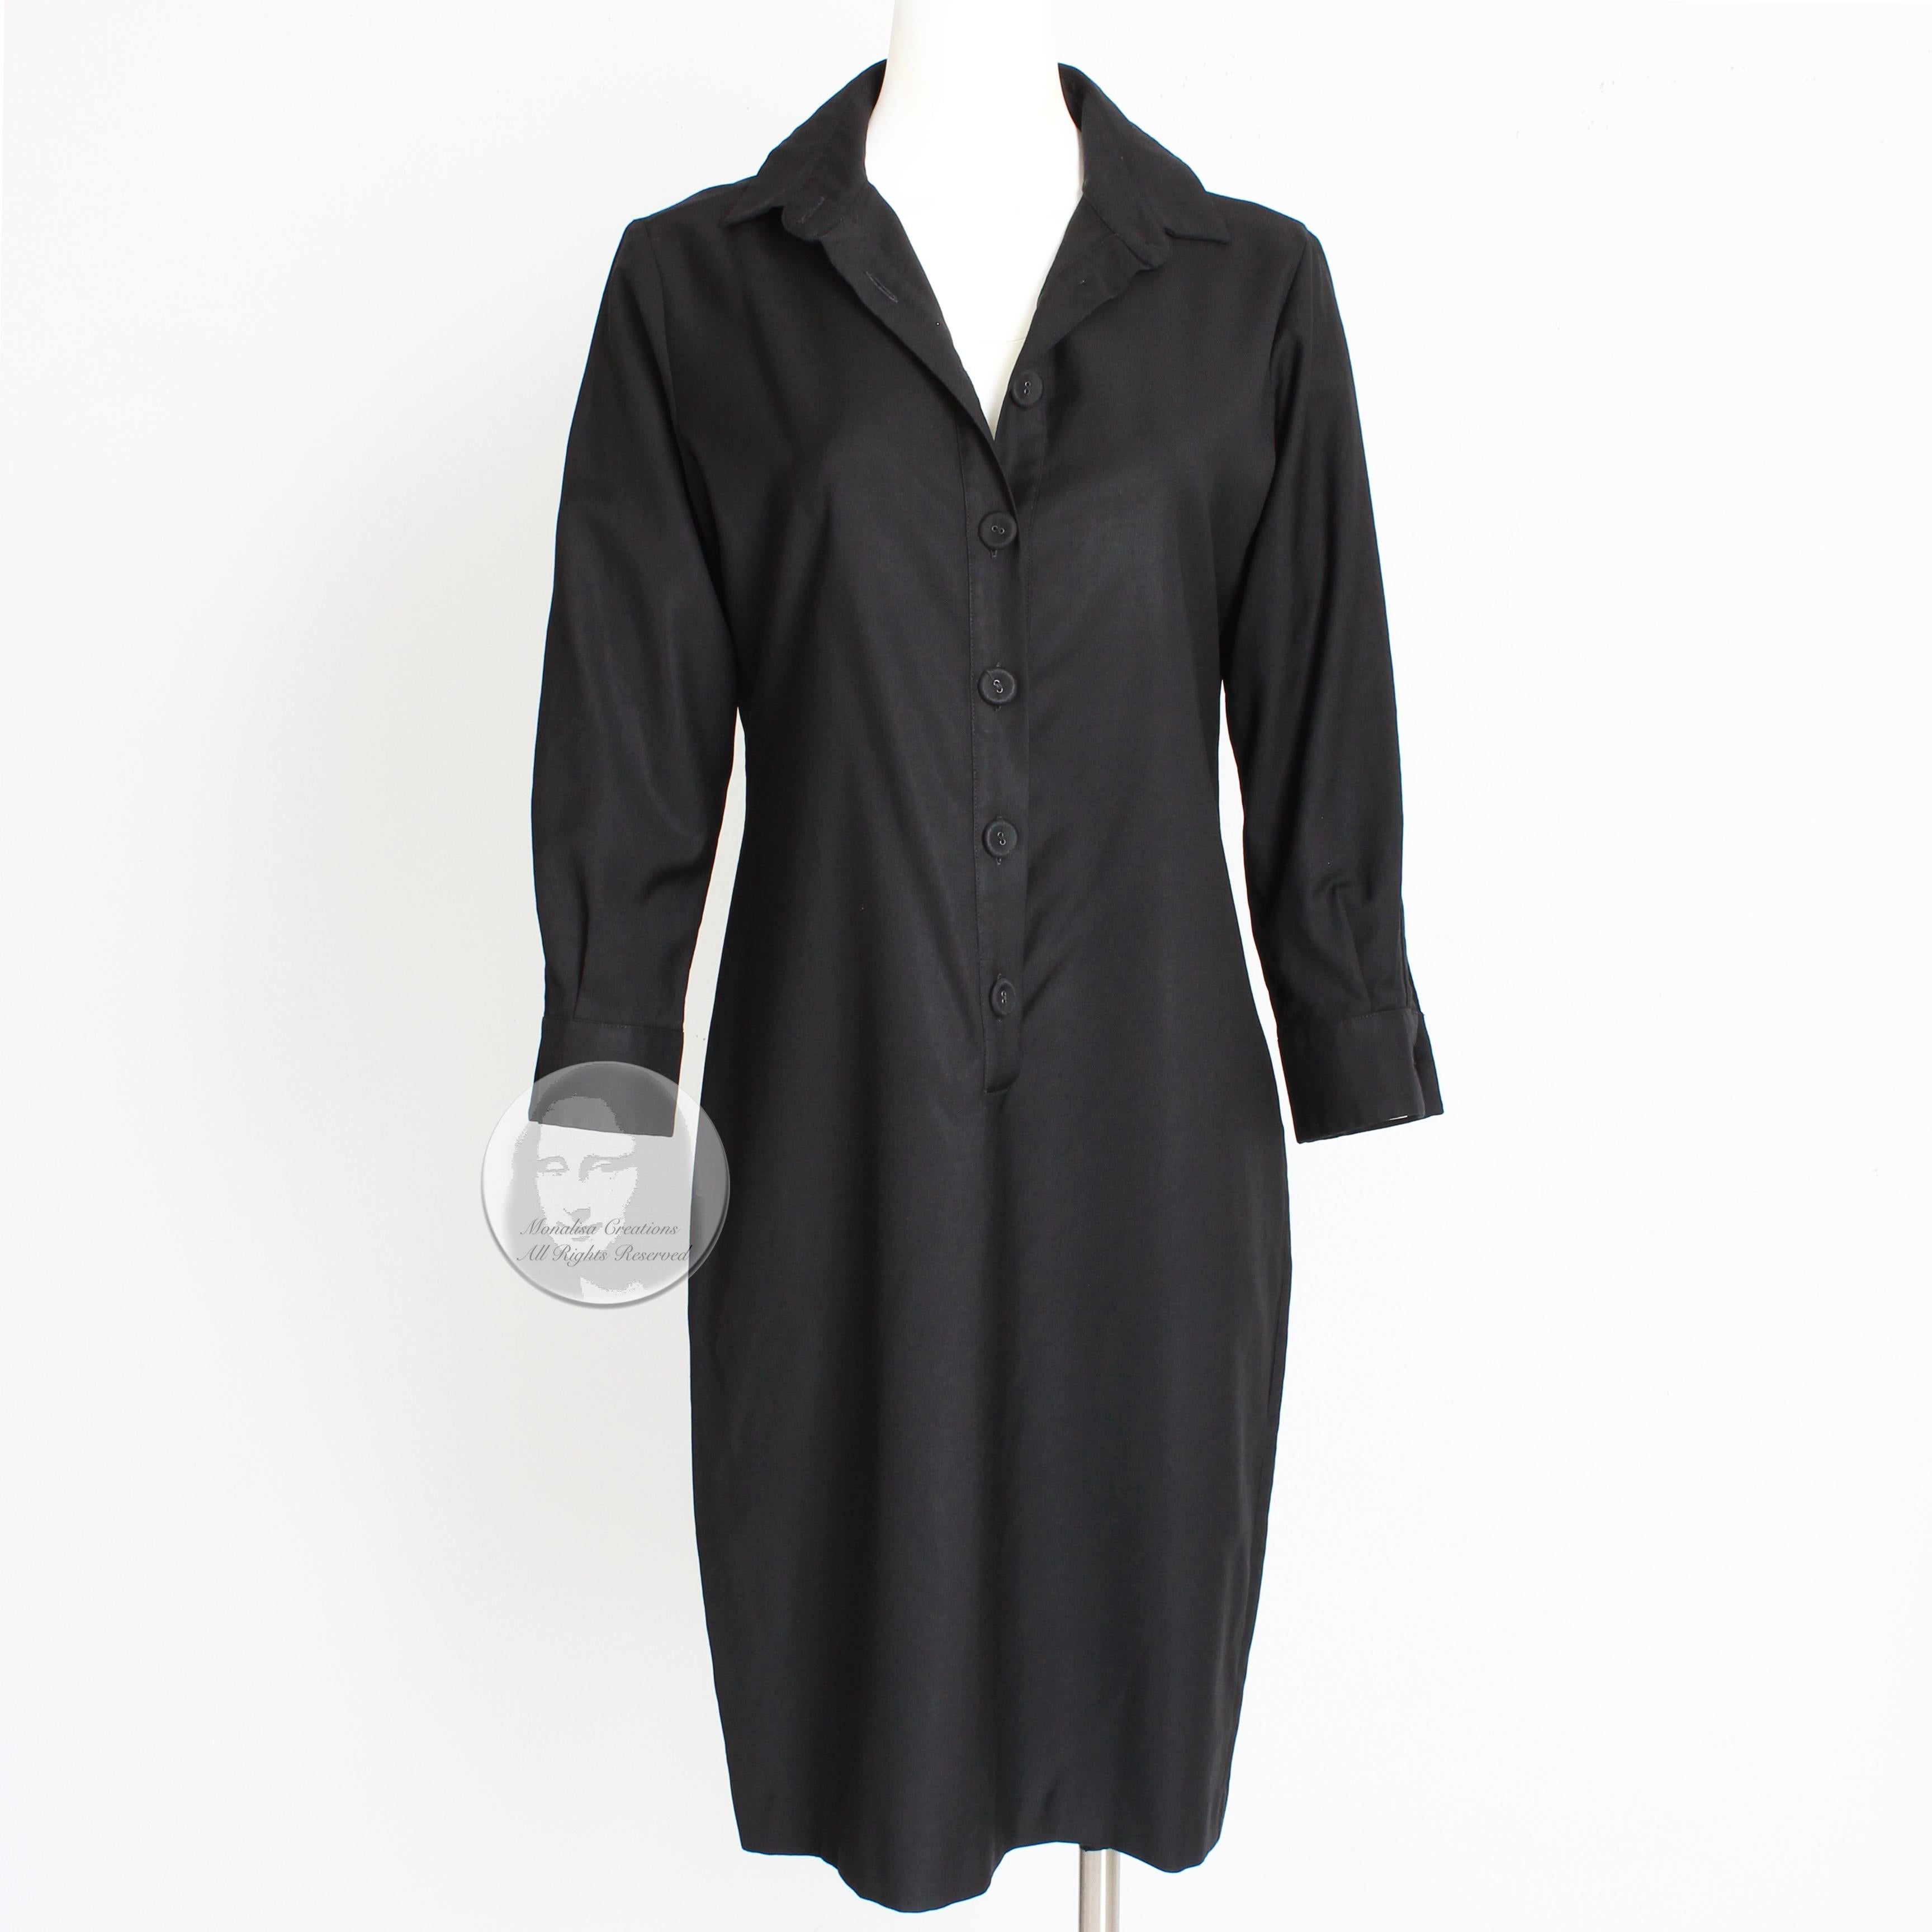 Authentic, preowned Bottega Veneta ladies black shirtwaist dress, likely made in the 90s.  Made from 100% virgin wool twill, it features a button front bodice and 3/4 sleeves.

A chic little black dress that's lightweight and so easy to wear and